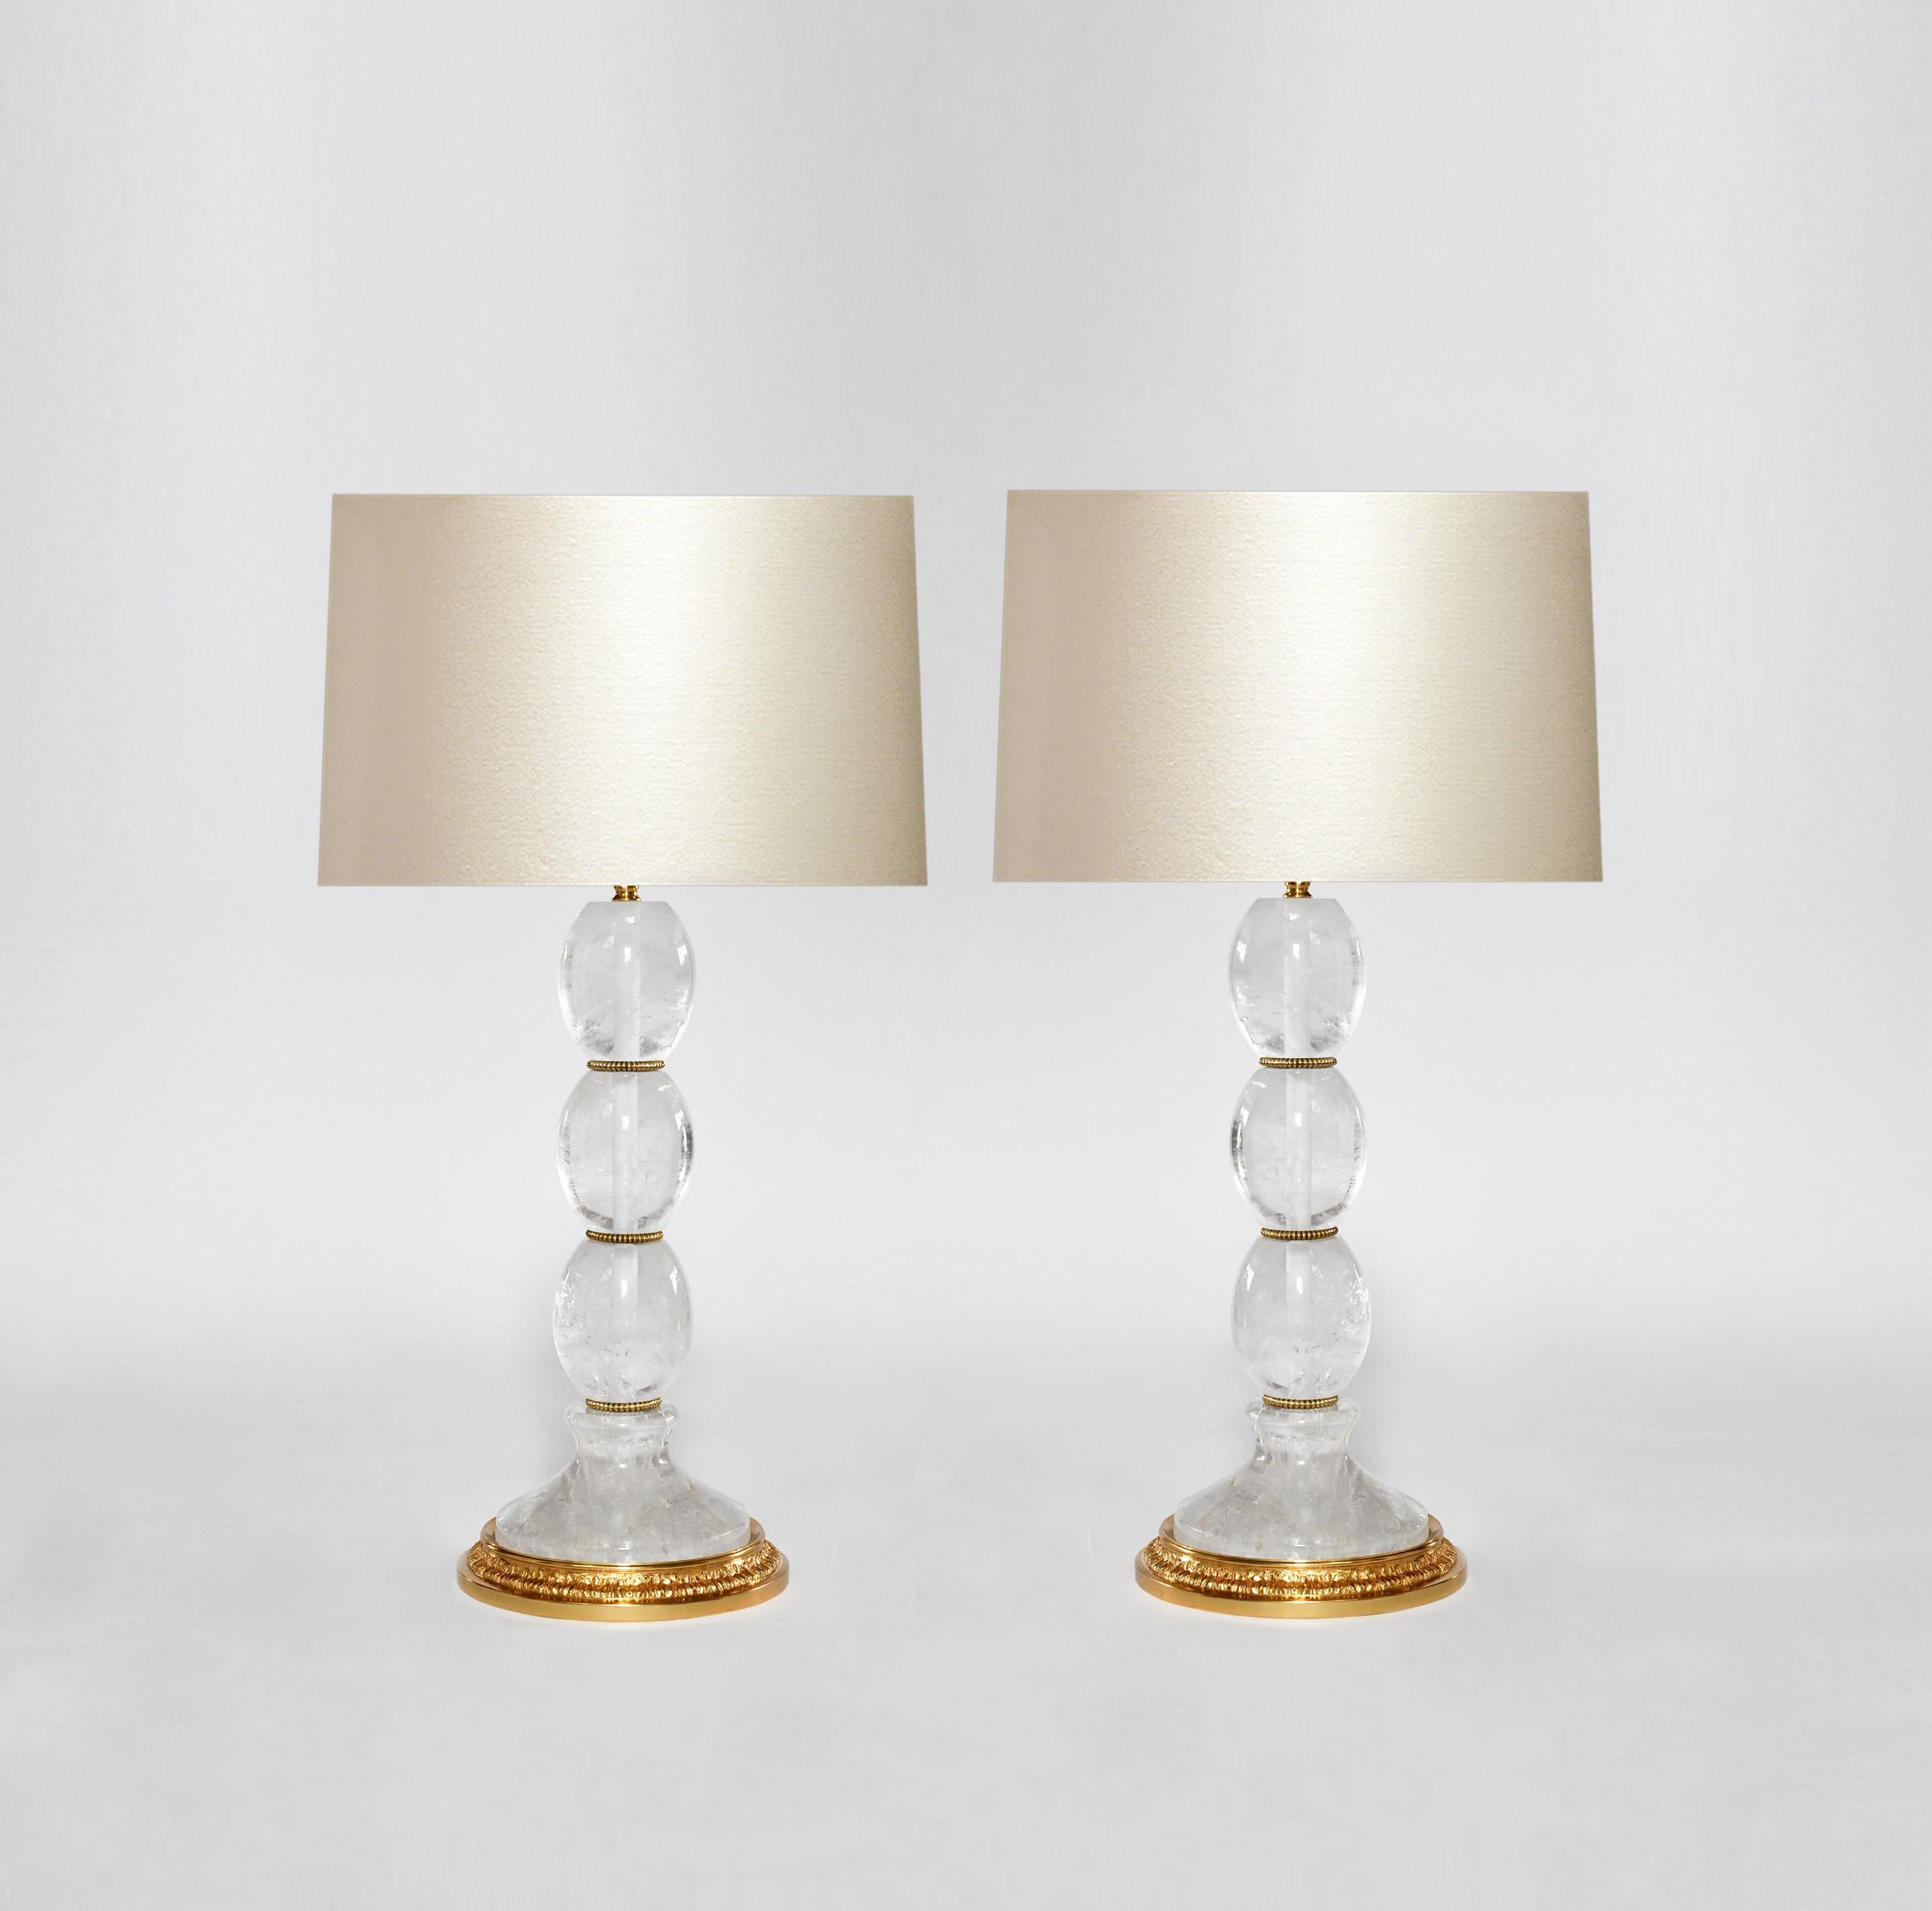 Pair of modern rock crystal lamps with polish brass decoration. Created by Phoenix Gallery, NYC.
To the top of the rock crystal is 15 in.
(Lampshade not included).
Custom size and metal finish upon request.